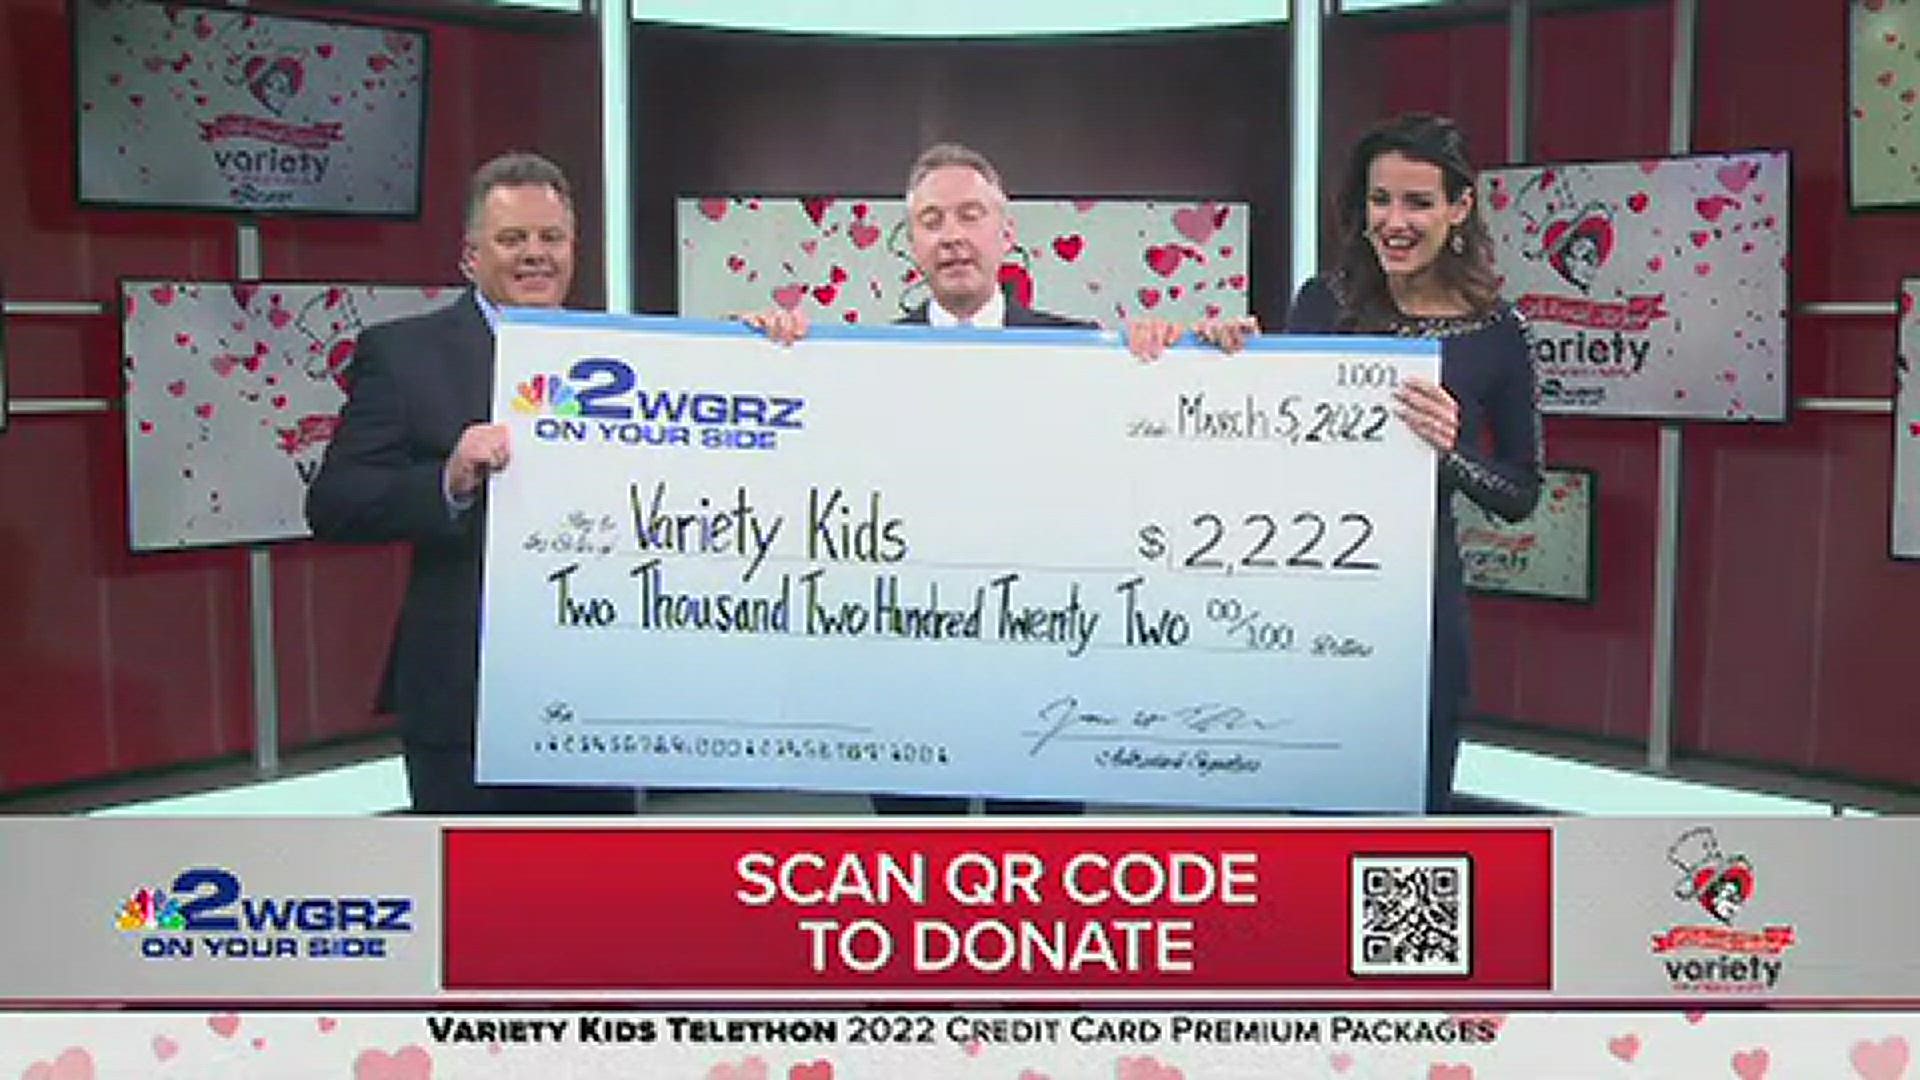 Let's dance: Channel 2 General Manager Jim Toellner and Chief Meteorologist Patrick Hammer celebrate Variety Kids Telethon donations.